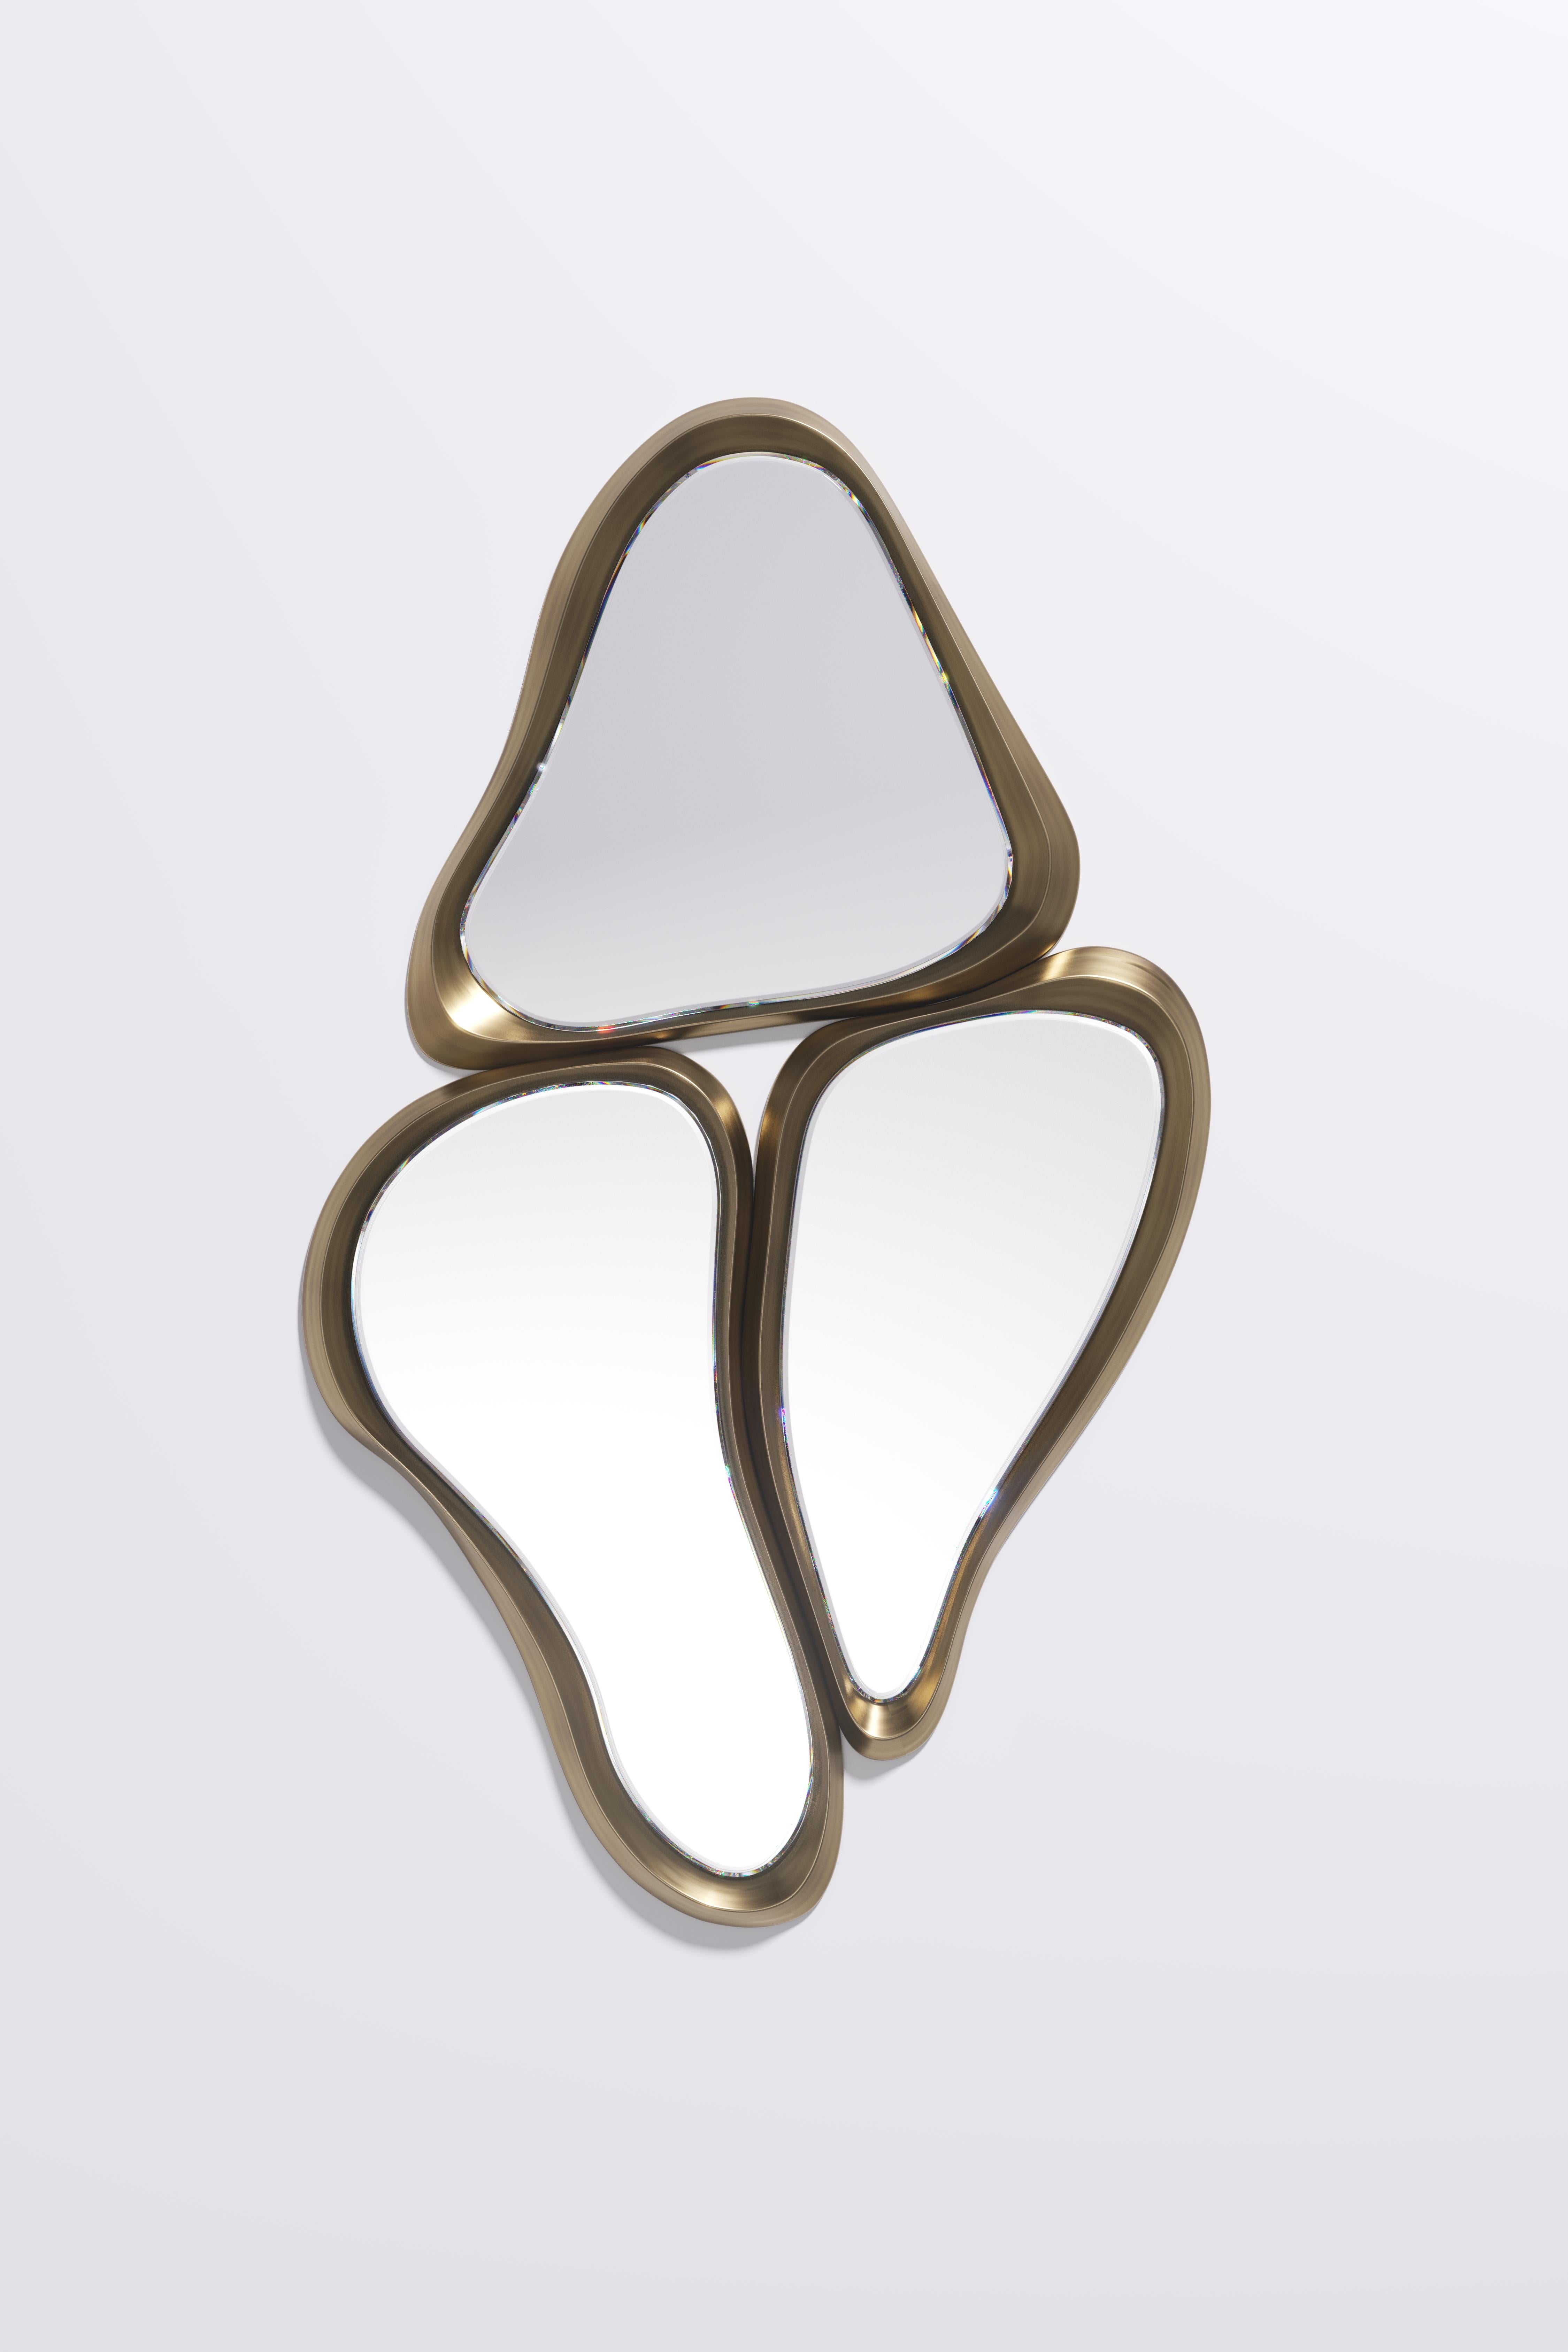 Hand-Crafted Sculptural Mirror in Cream Shagreen and Bronze-Patina Brass by Kifu Paris For Sale